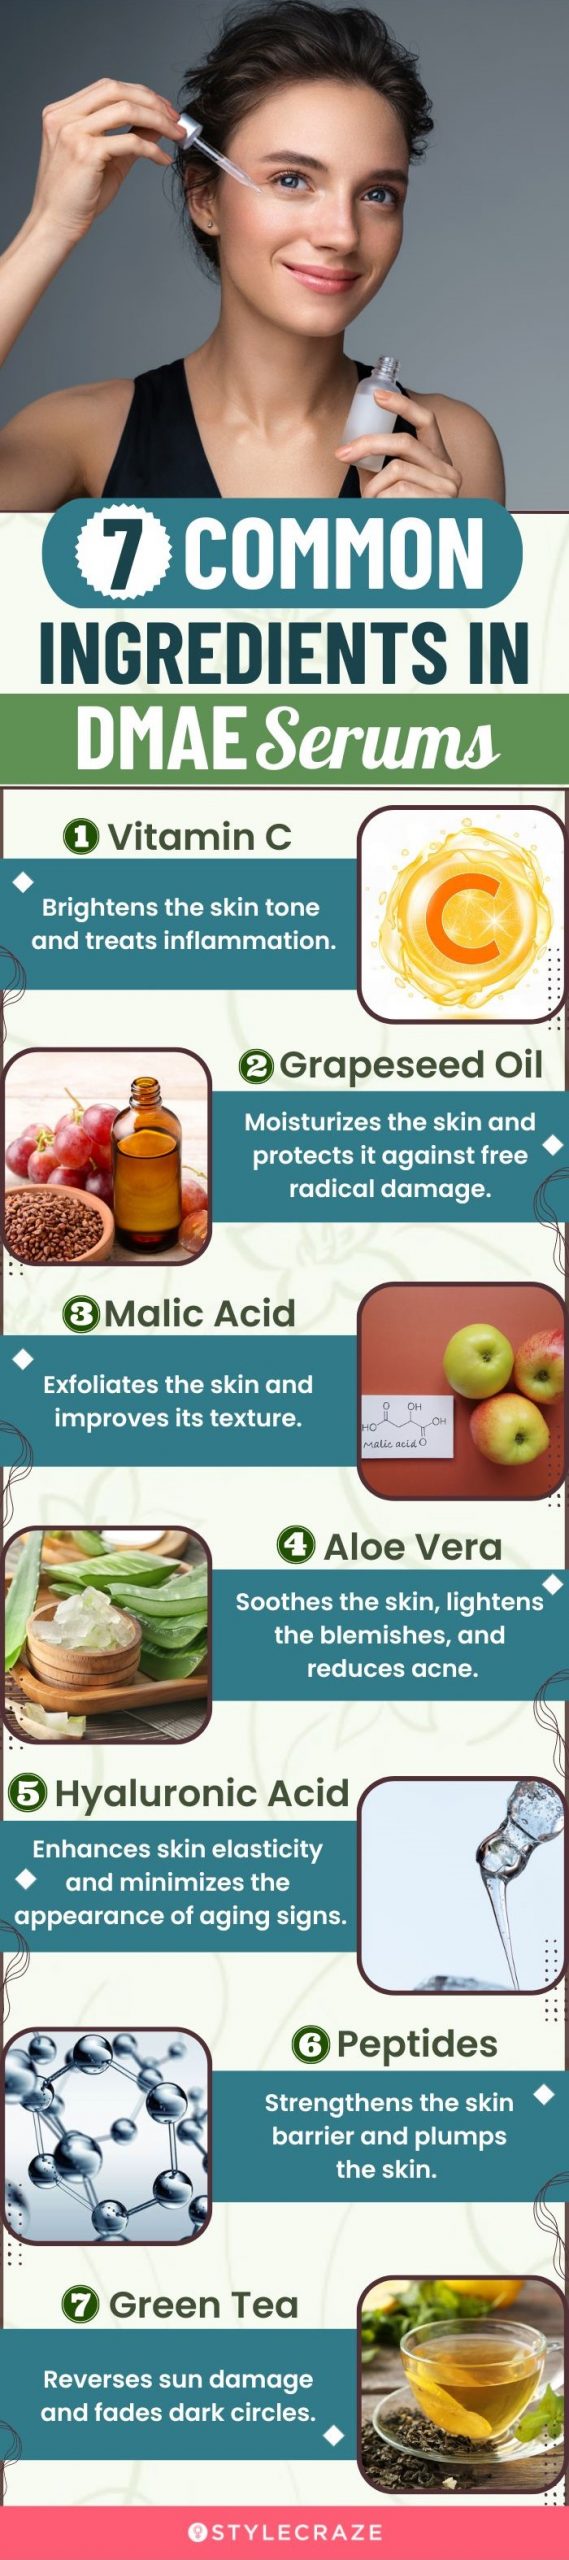 7 Common Ingredients In DMAE Serums (infographic)